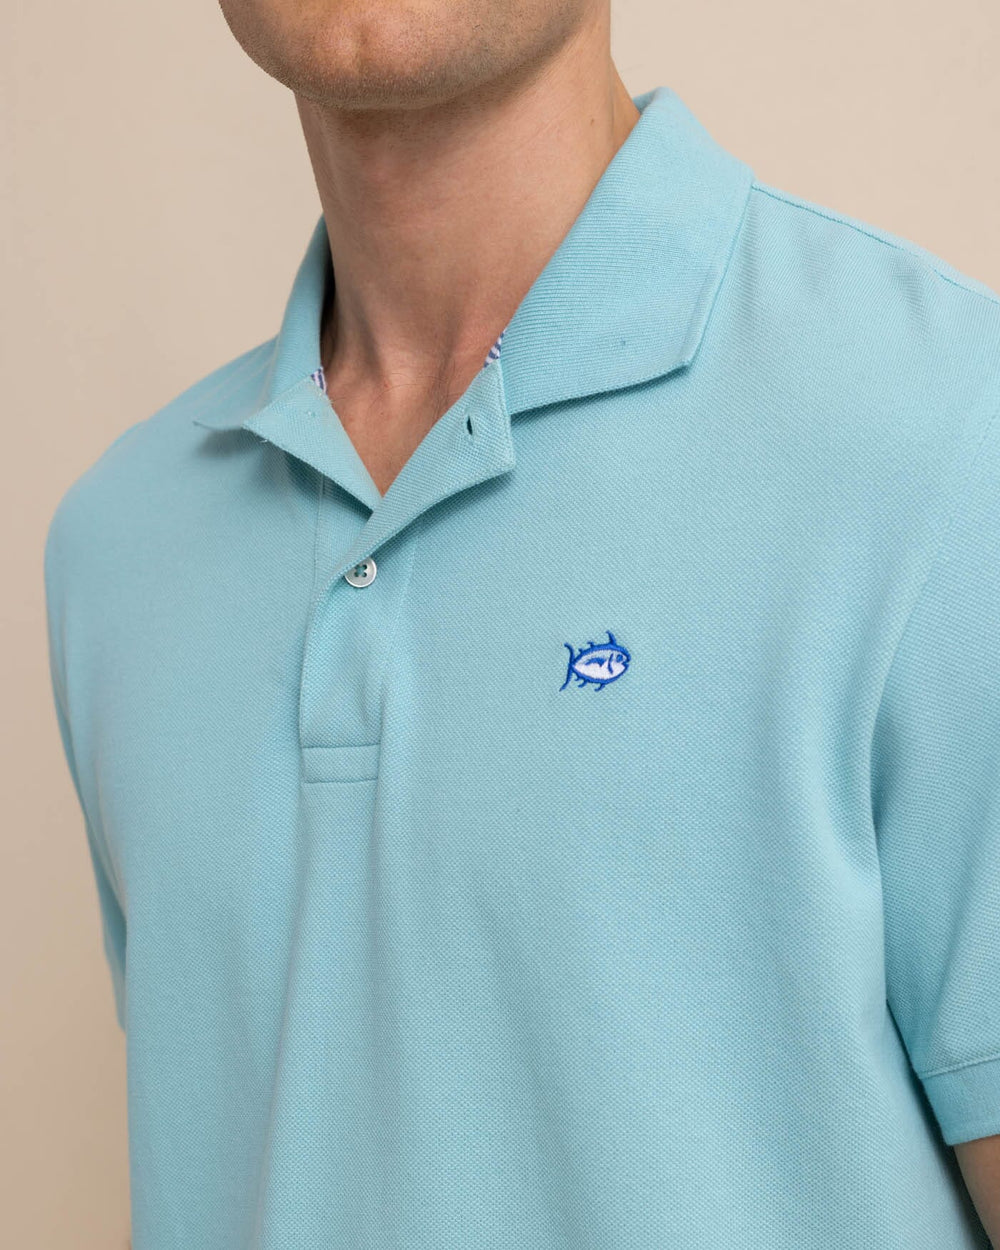 The detail view of the Southern Tide new-skipjack-polo-shirt by Southern Tide - Marine Blue